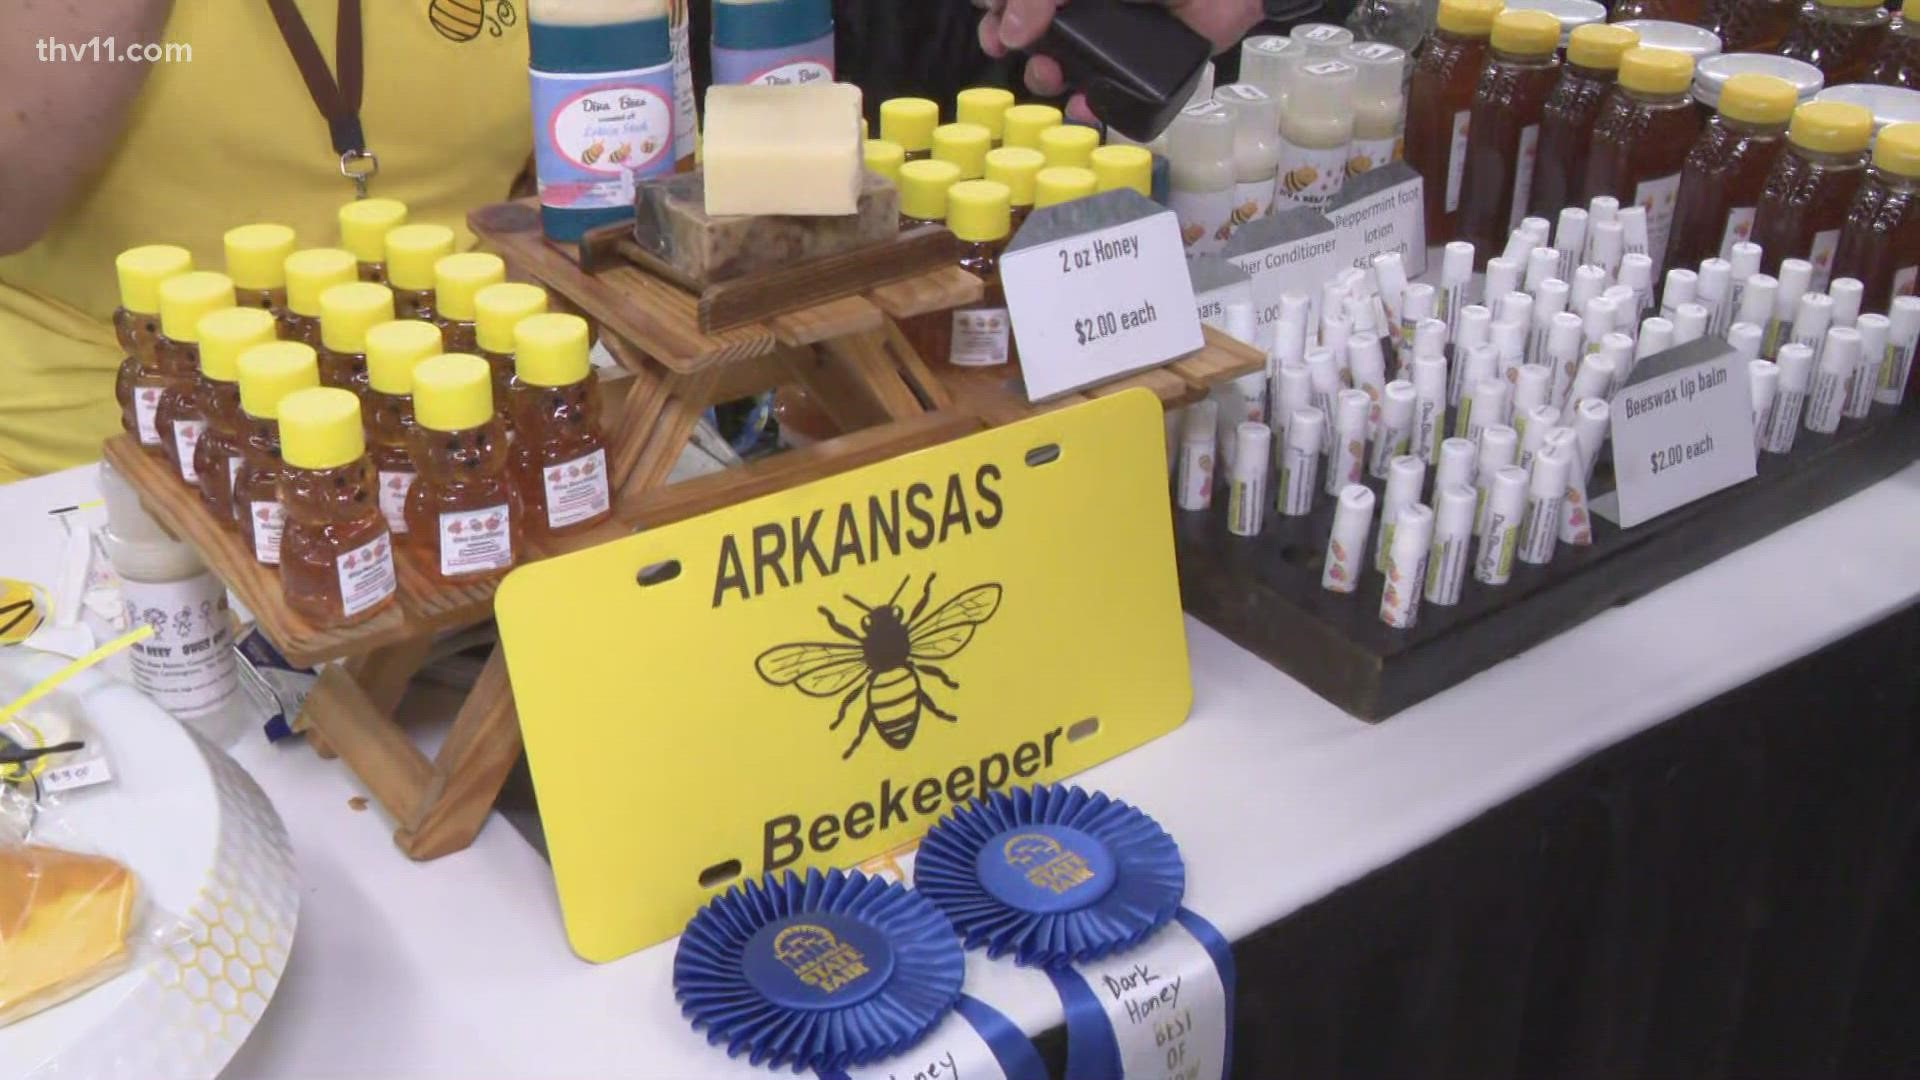 You can find locally-made products at the Arkansas State Fair through Sunday!